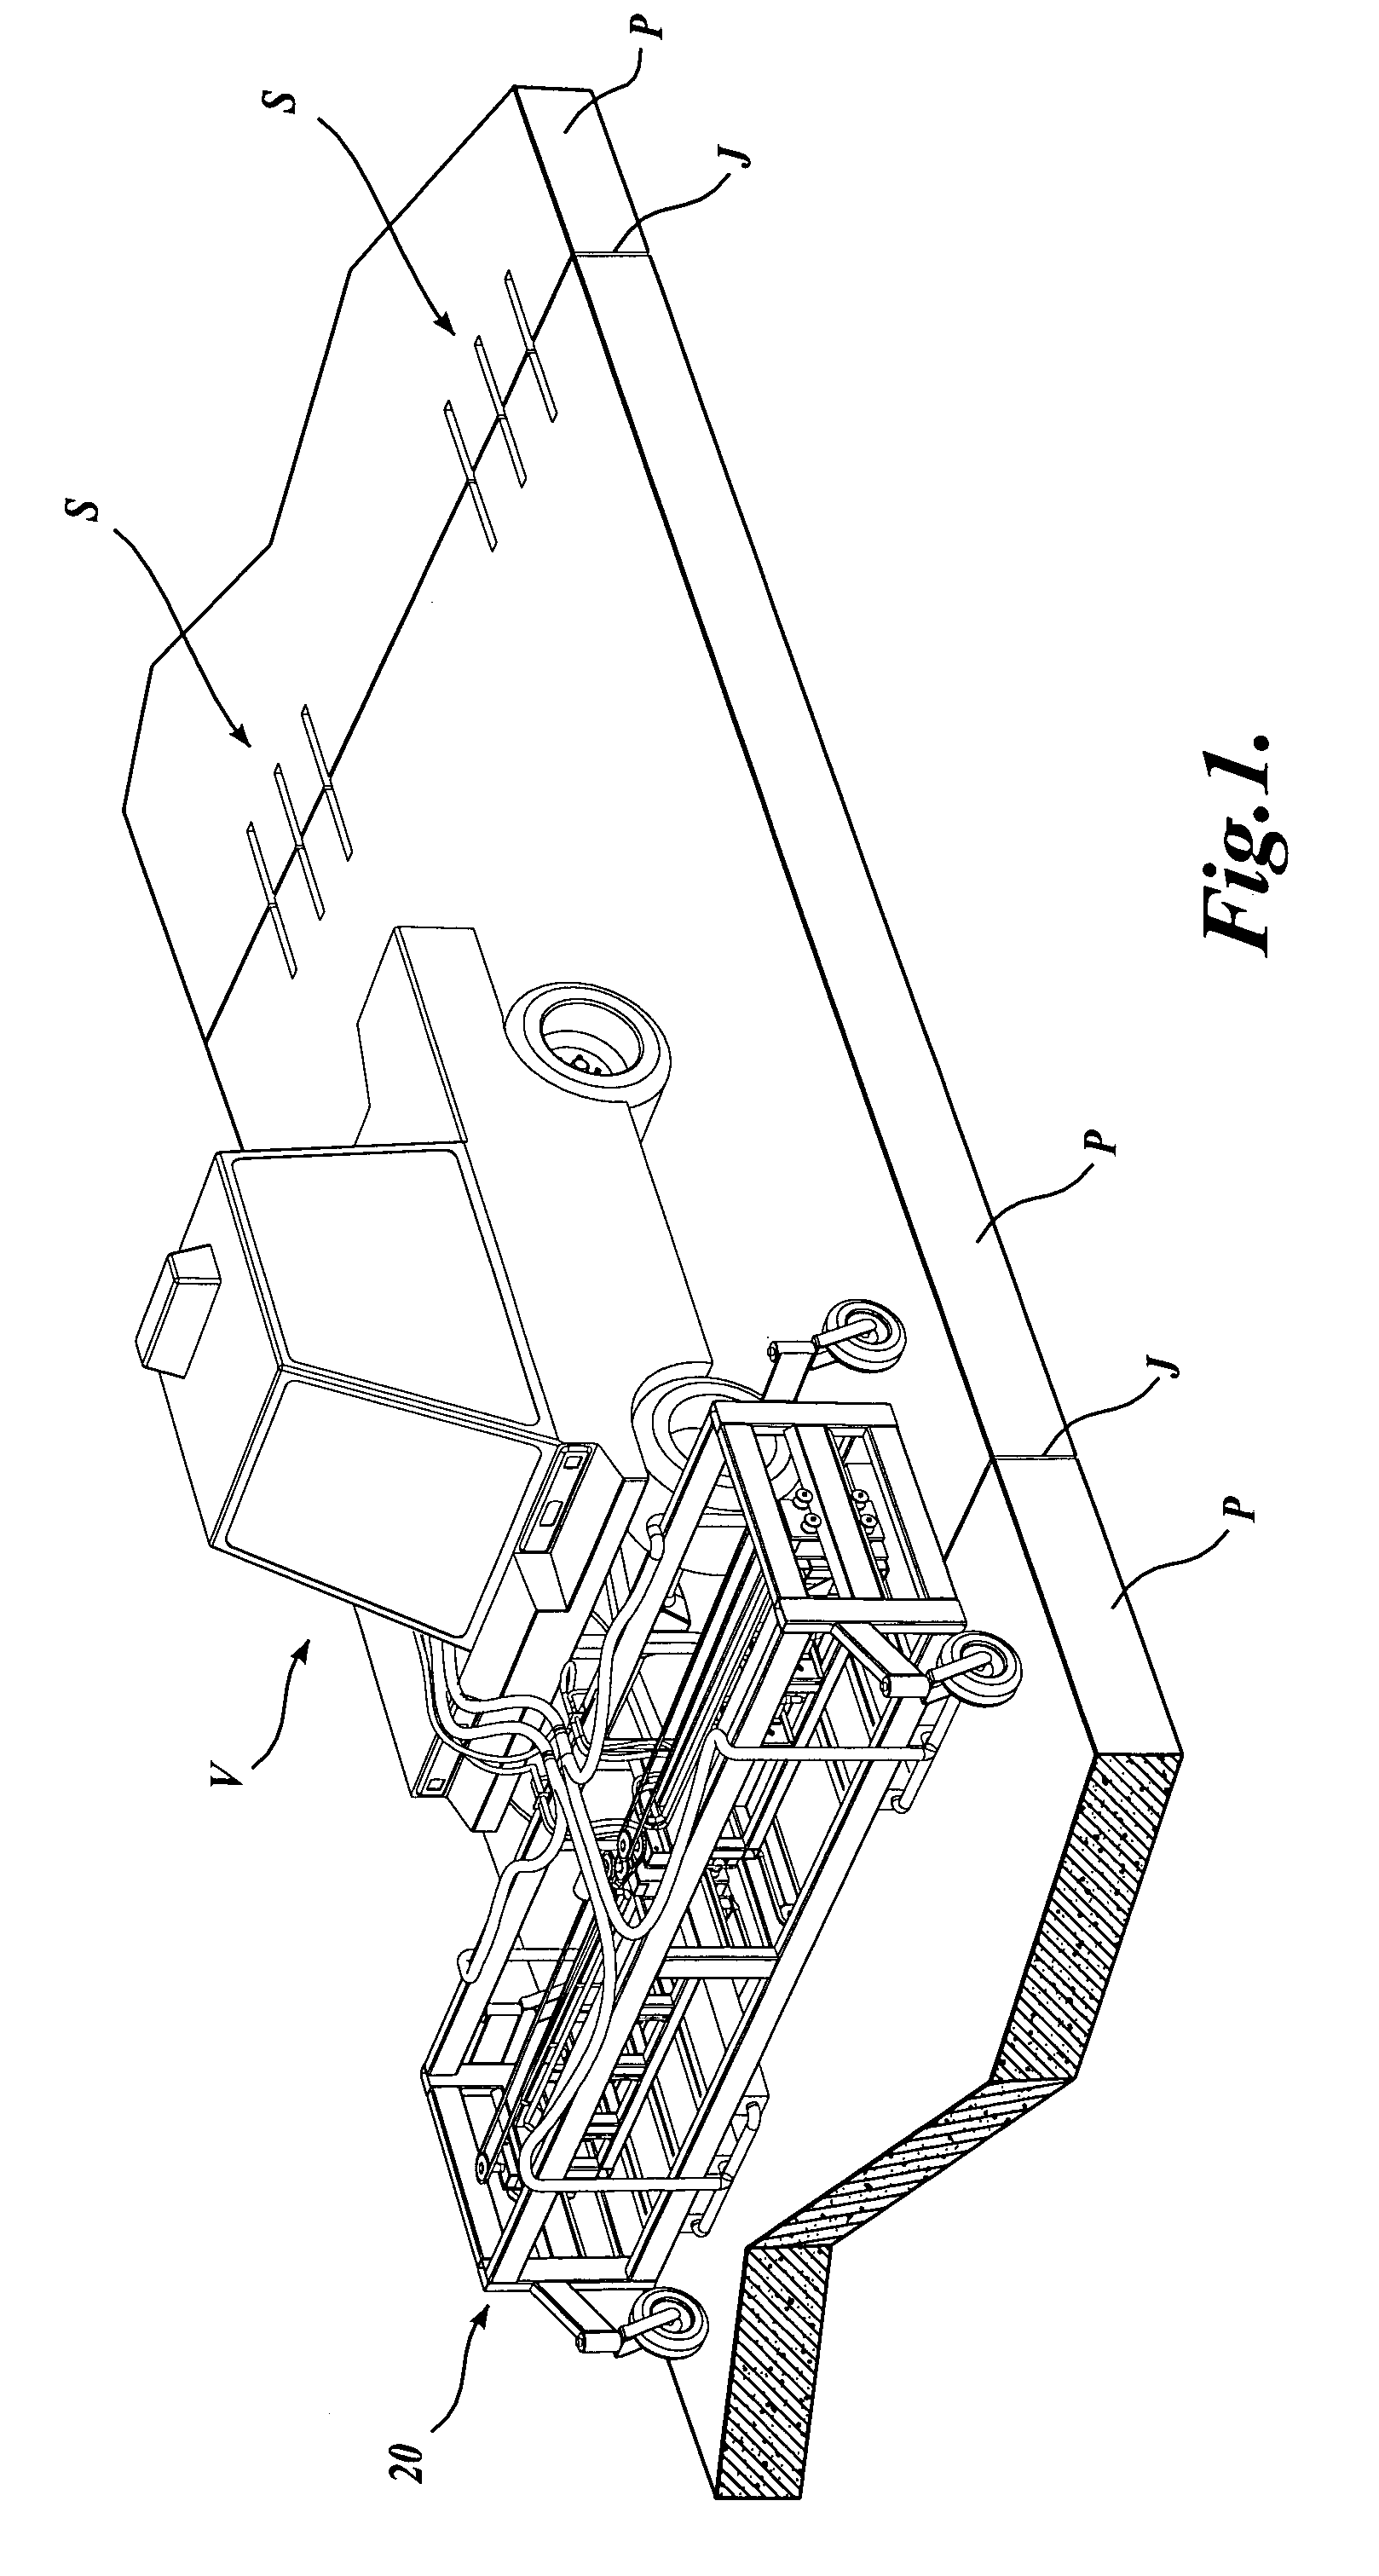 Substrate removal apparatus